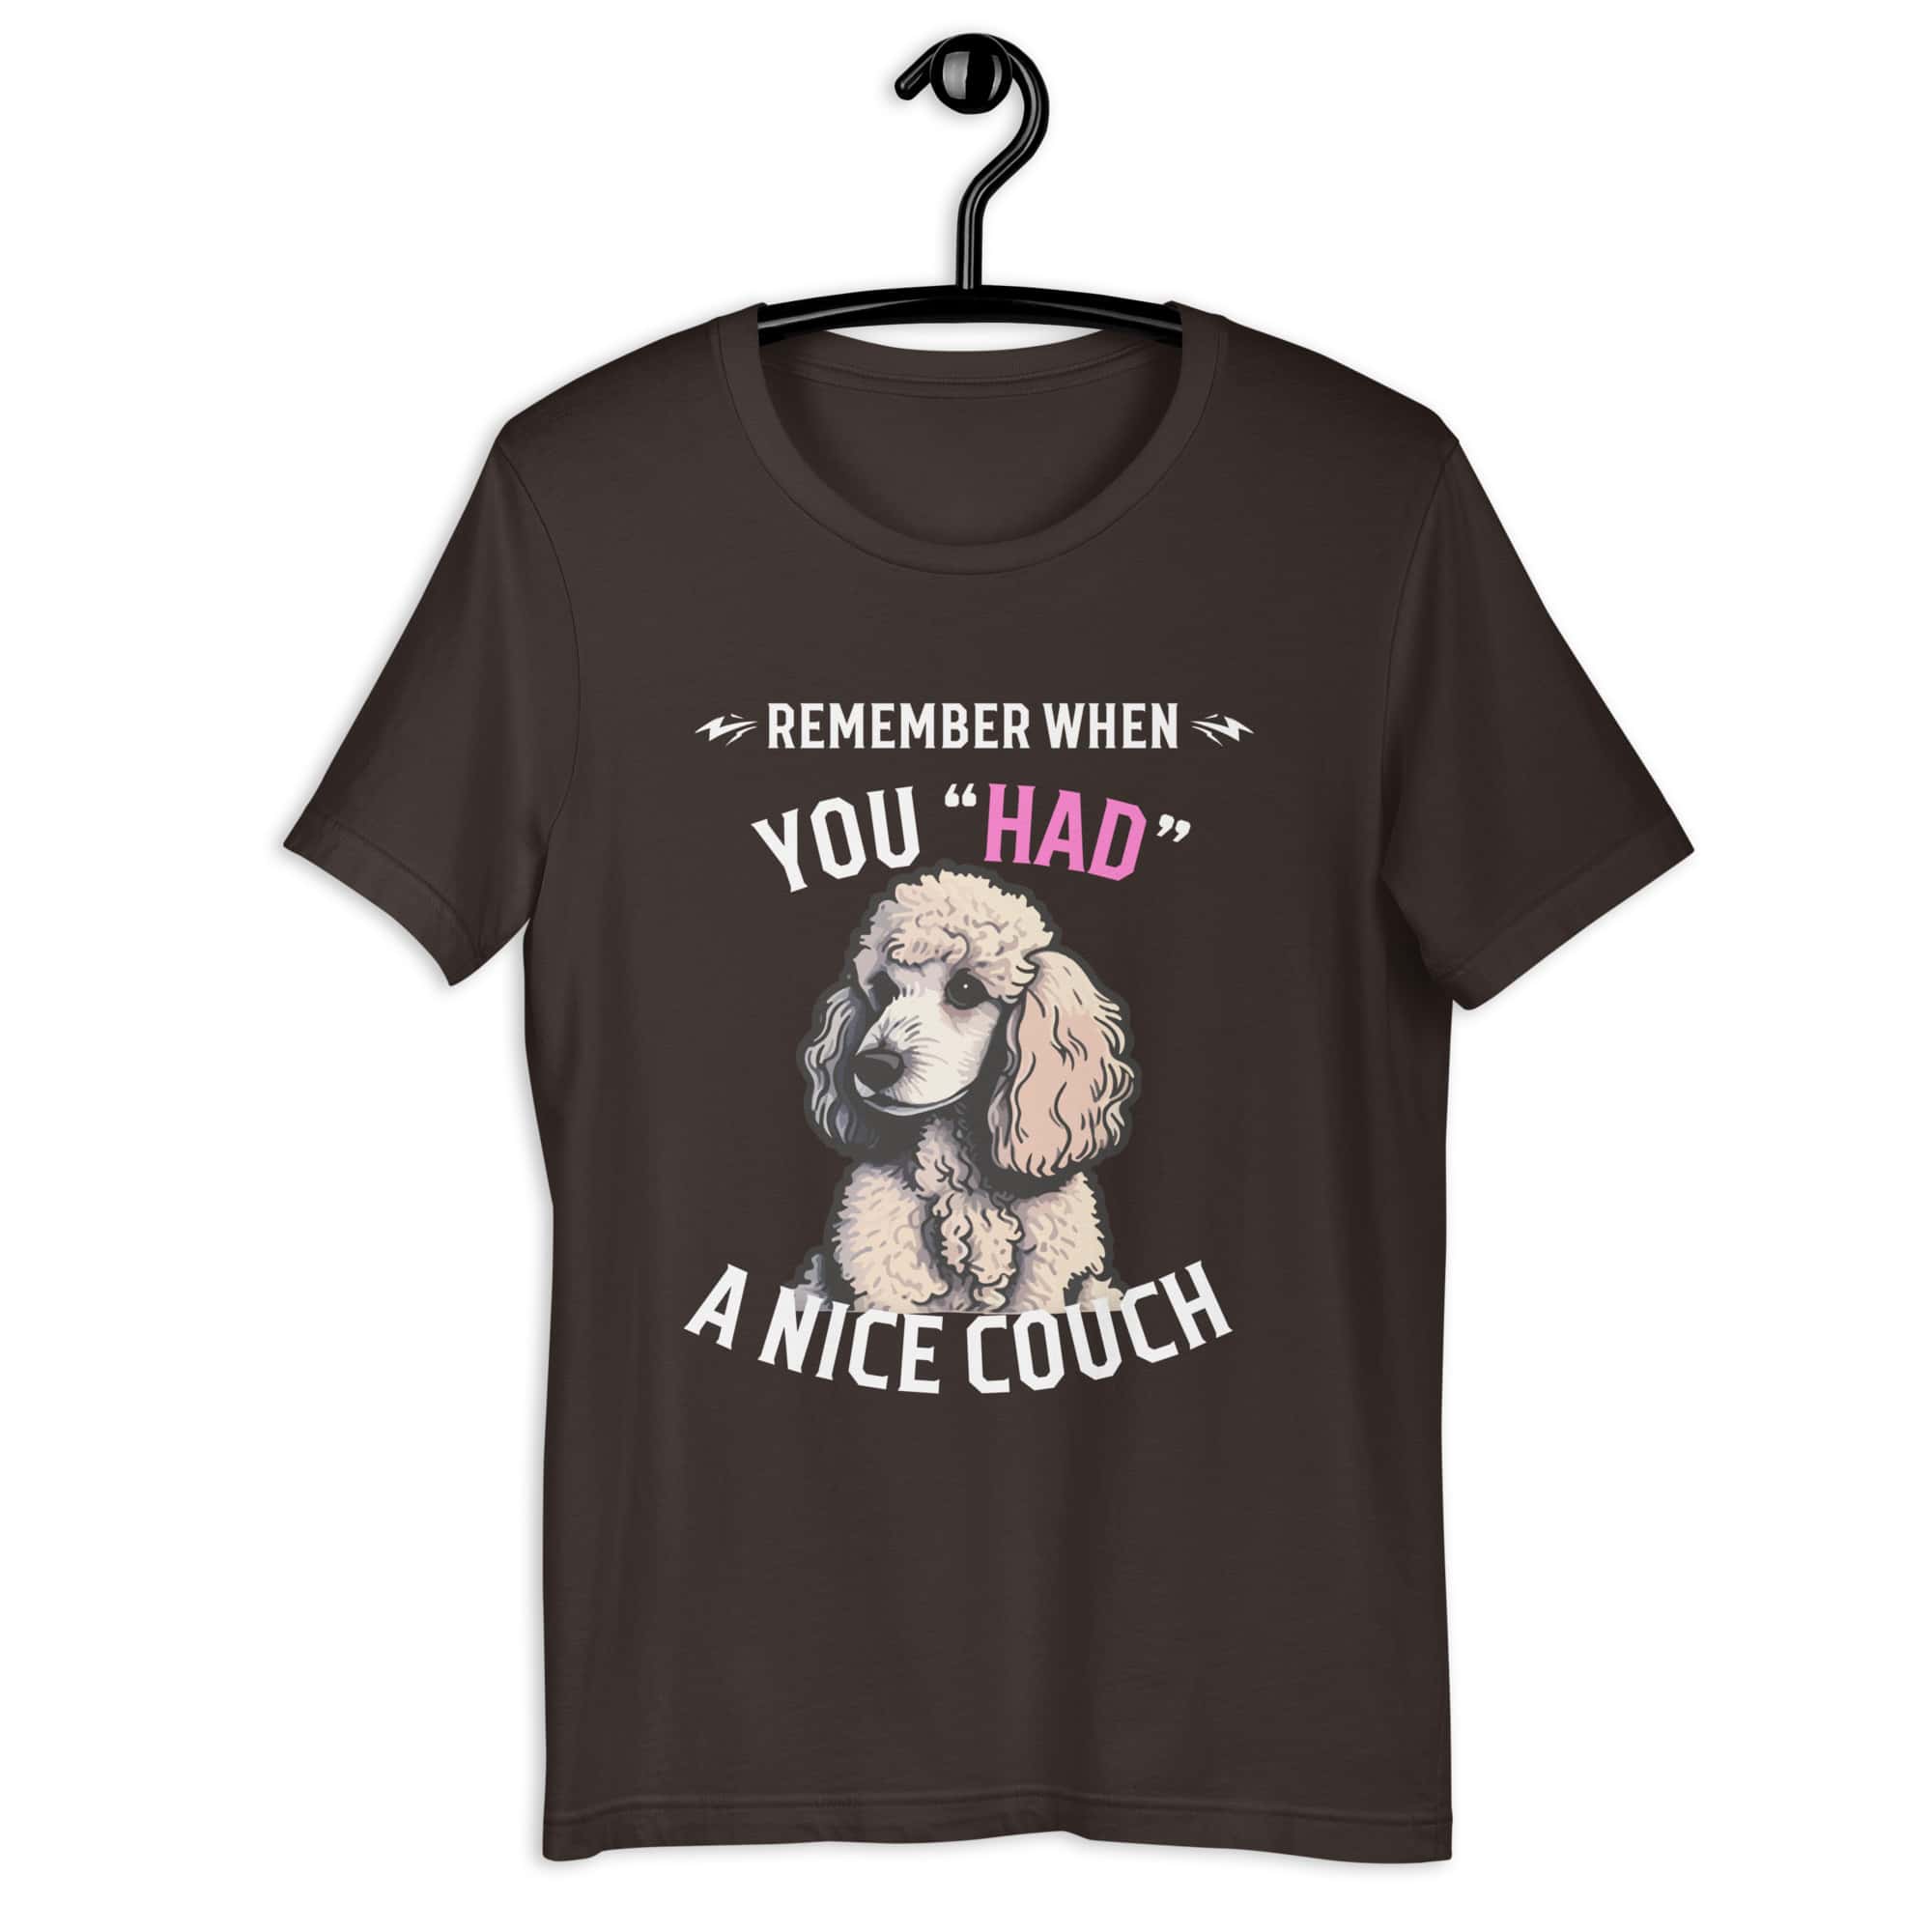 "Remember When You Had A Nice Couch" Funny Poodle Unisex T-Shirt brown